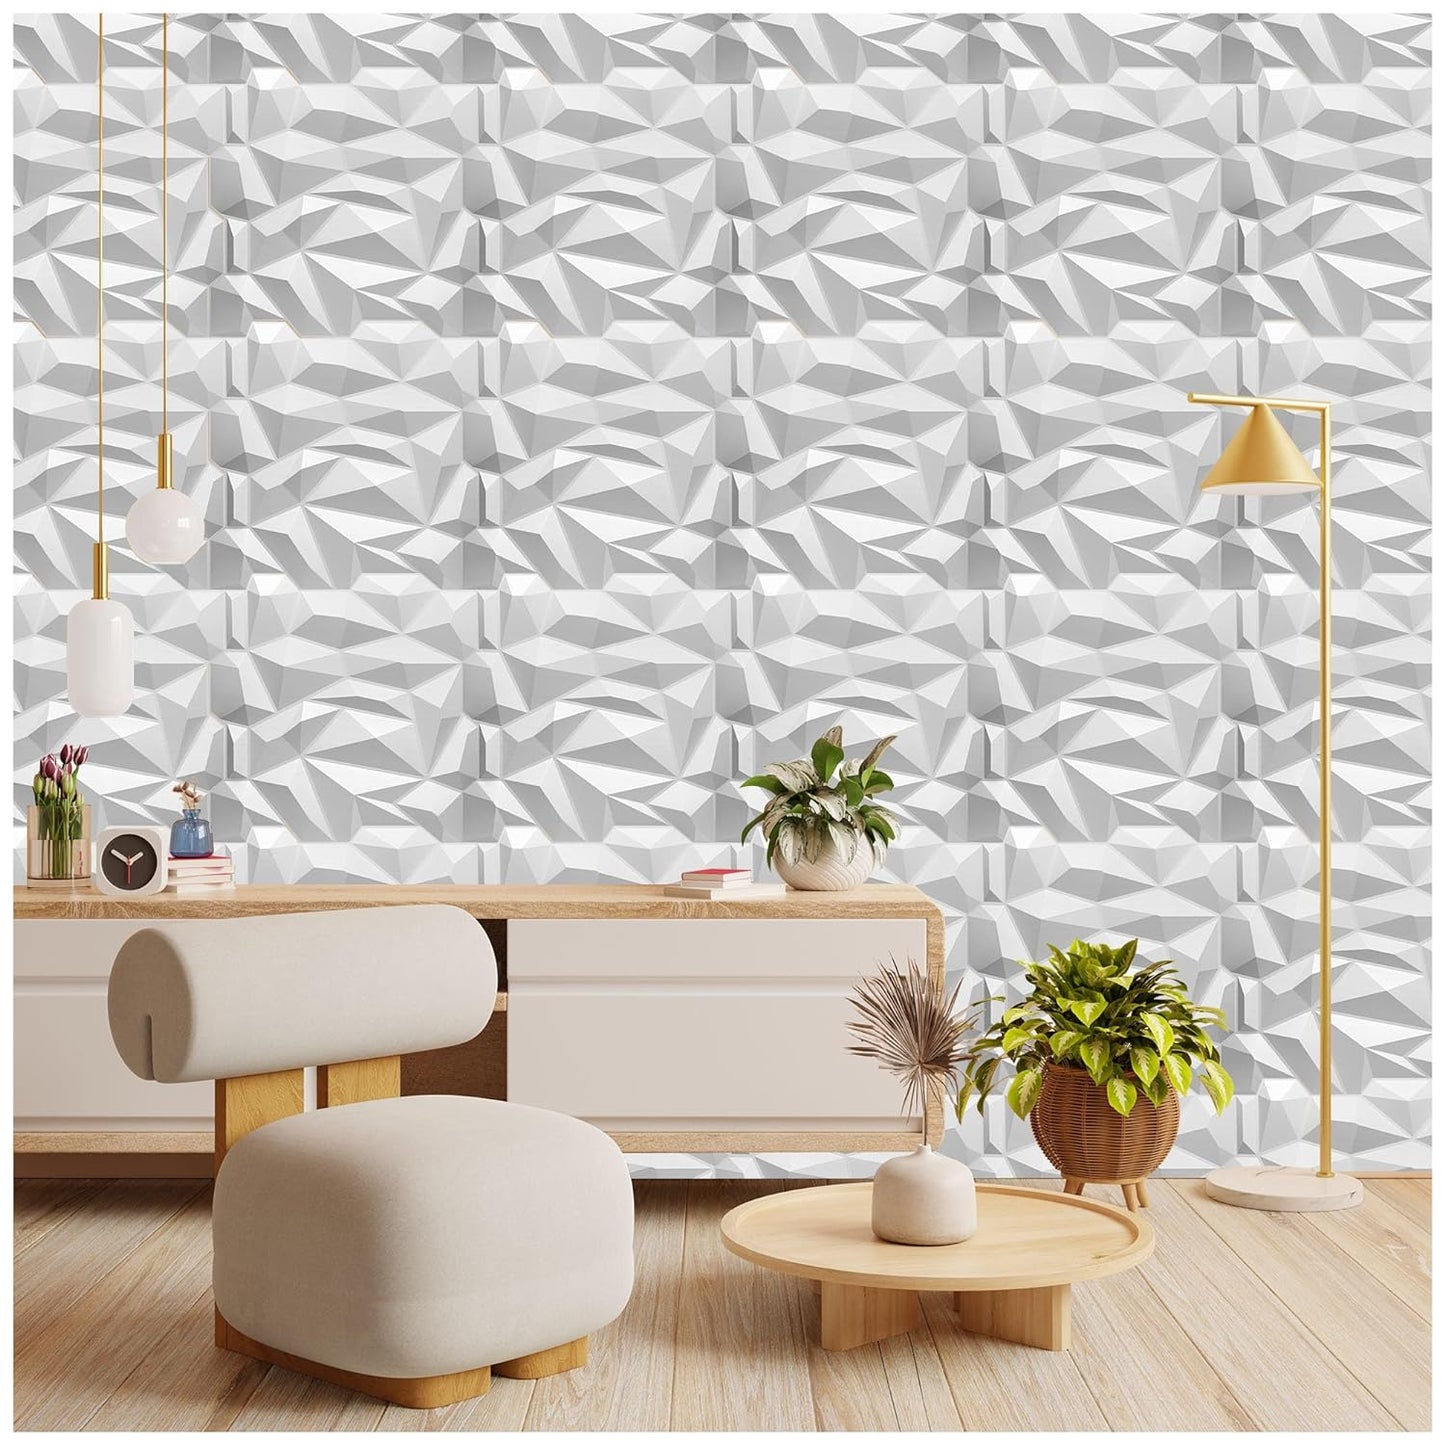 3D PVC Diamond Wall Panel Jagged Matching-Matt White for Residential and Commercial Interior Decor (47 x 47 cm Covers 2.3 Sq. ft.)